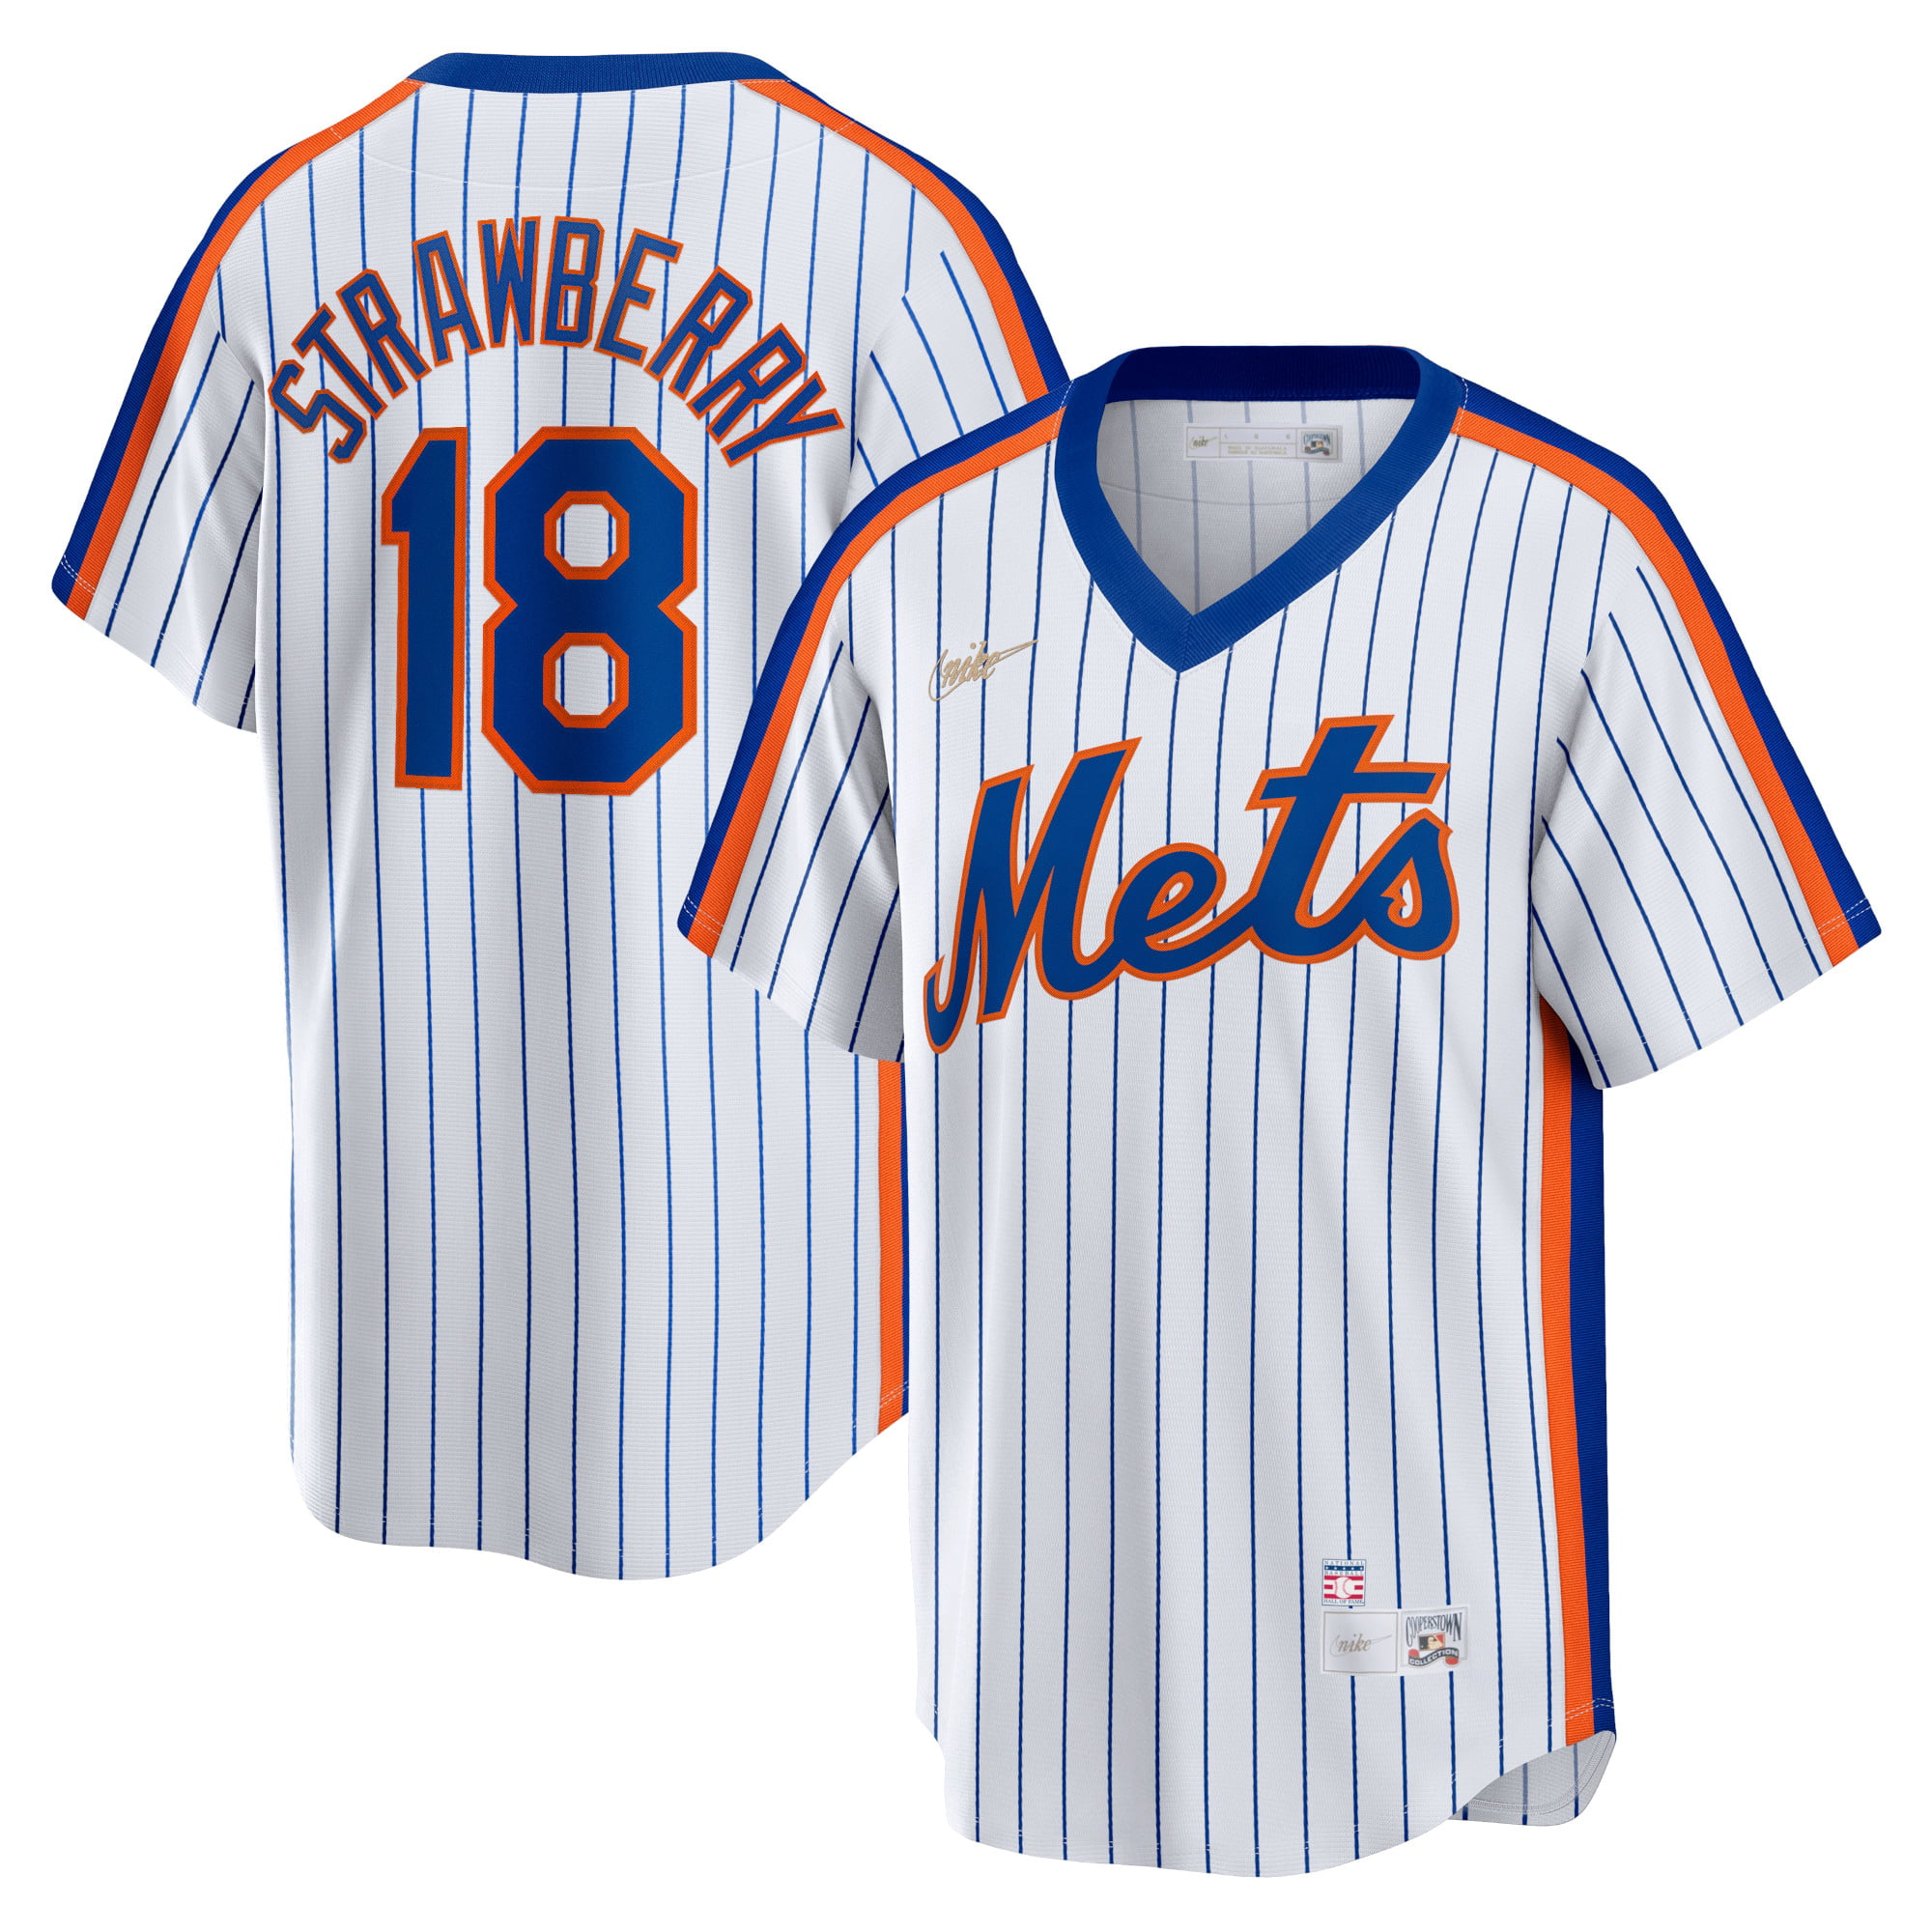 Men's Nike Darryl Strawberry White New York Mets Home Cooperstown